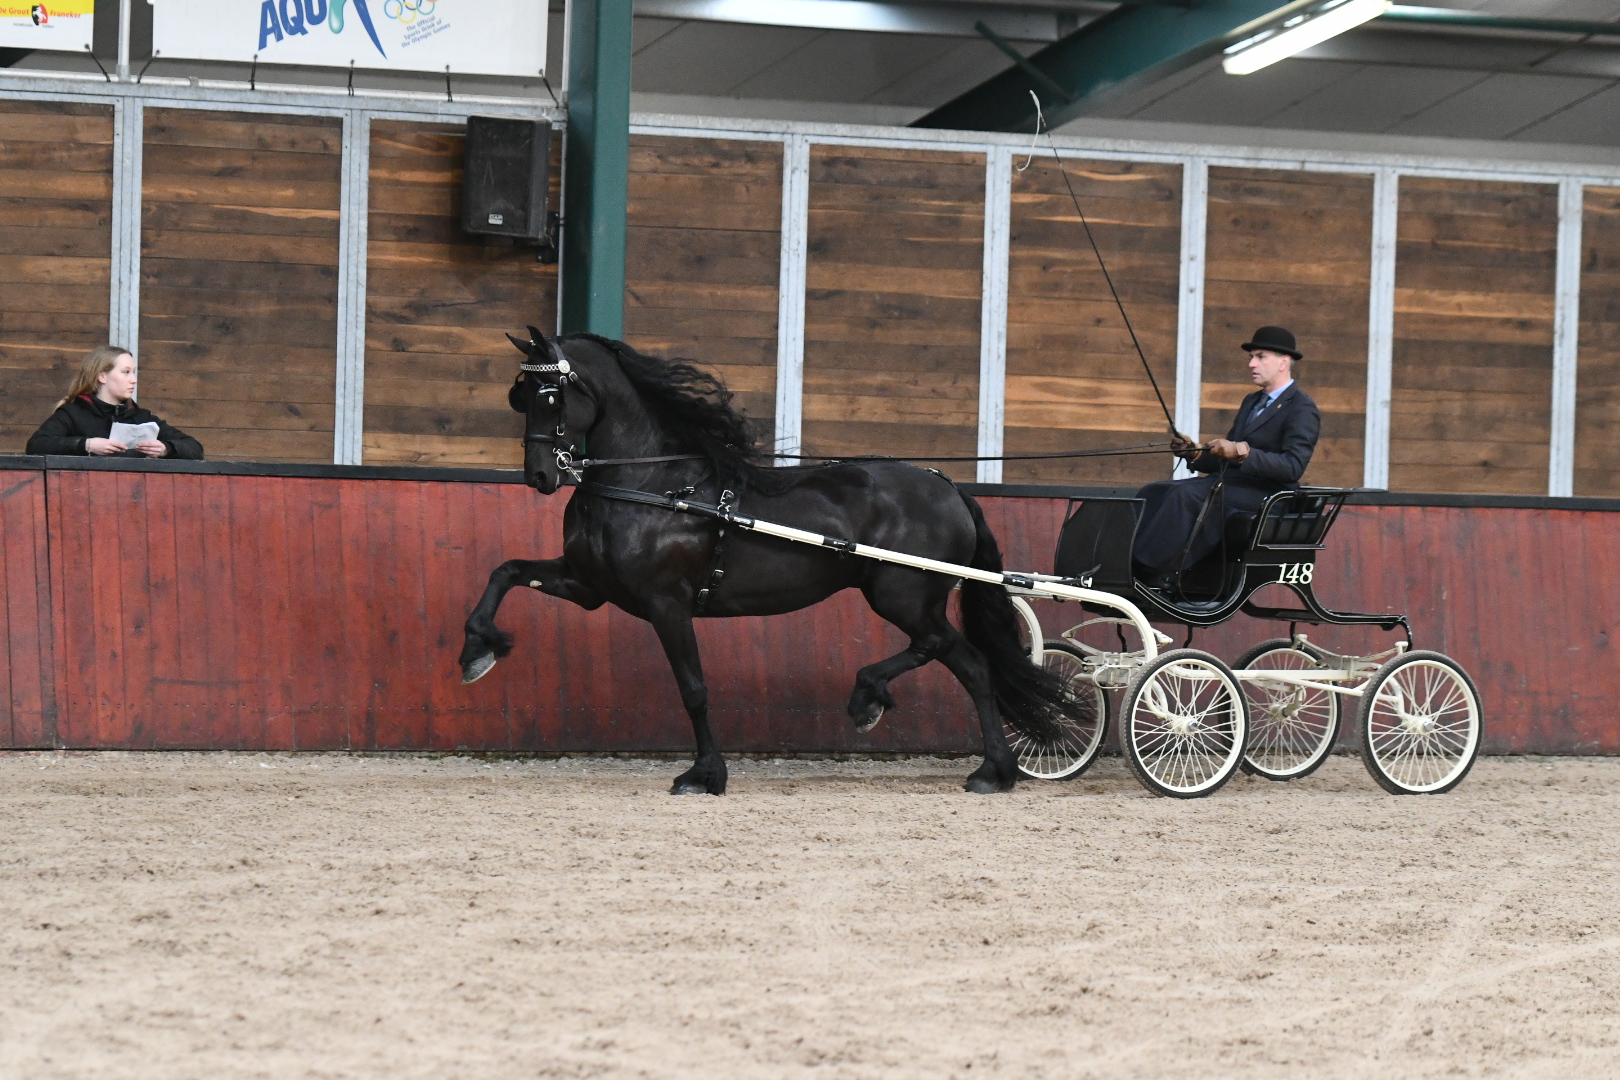 Phenomenon Yersie C. (Hessel 480) earned third triple A ranking with 93 points for the IBOP harness test